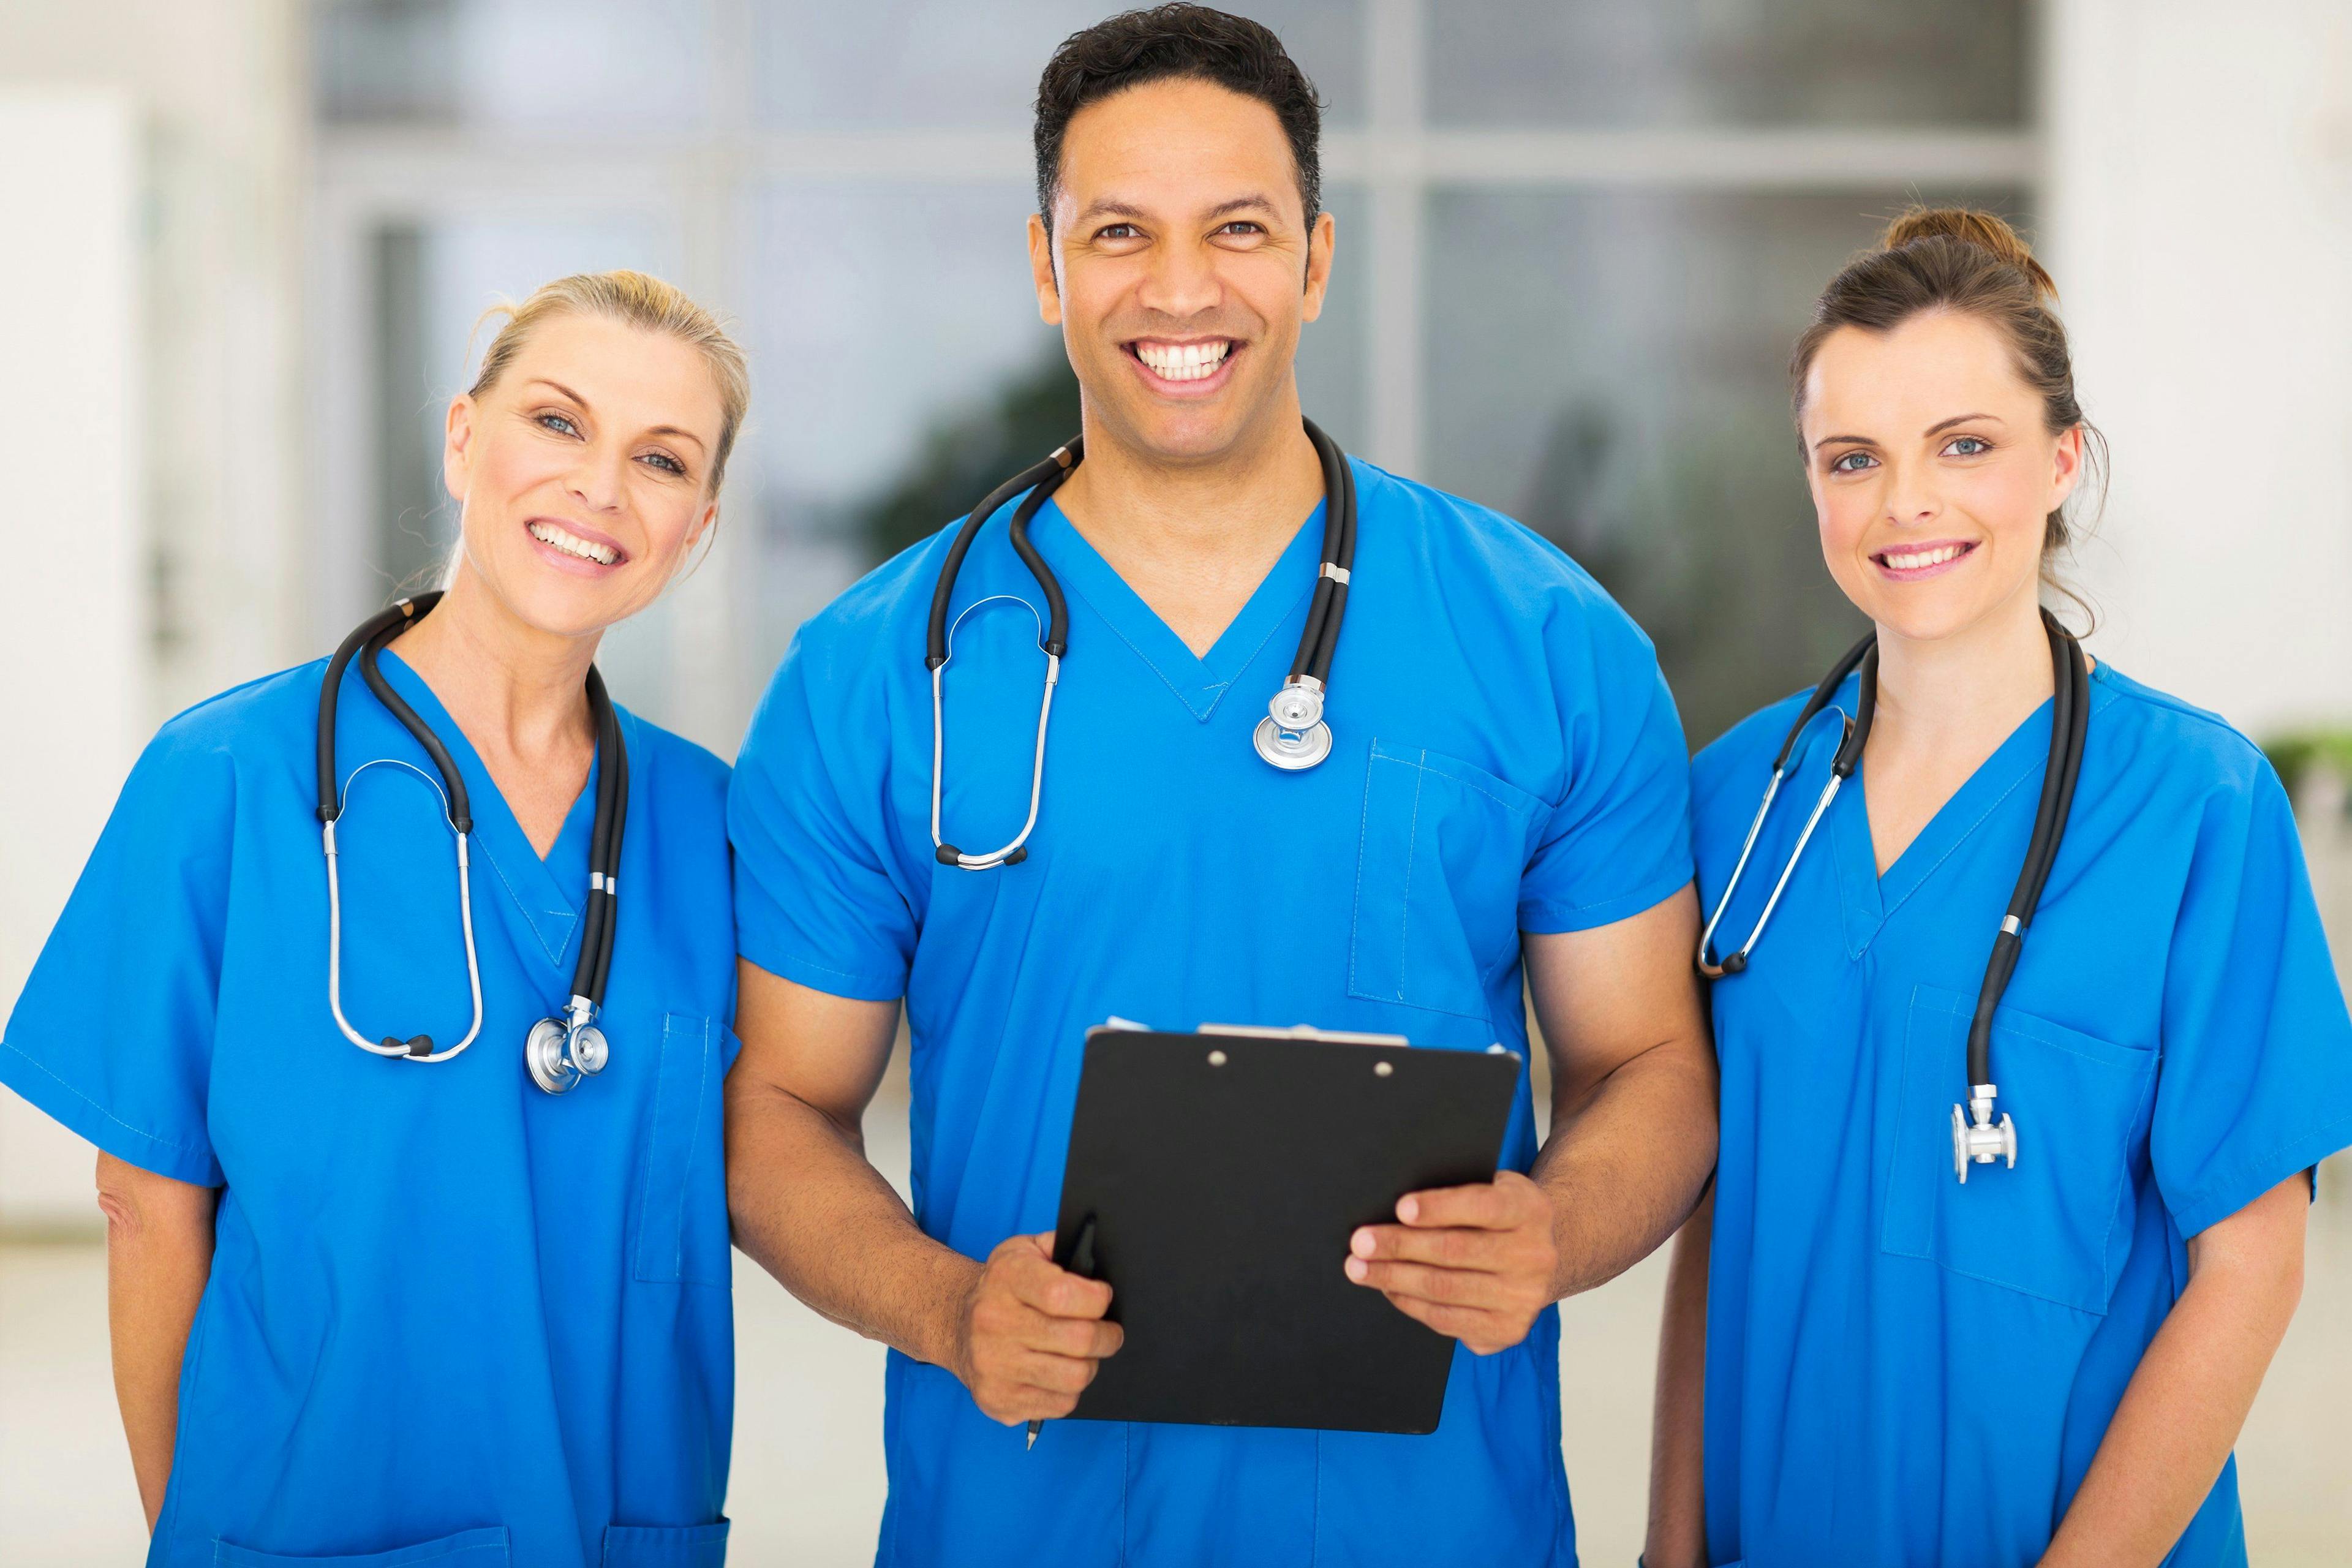 Nurse practitioners granted full practice authority in New York